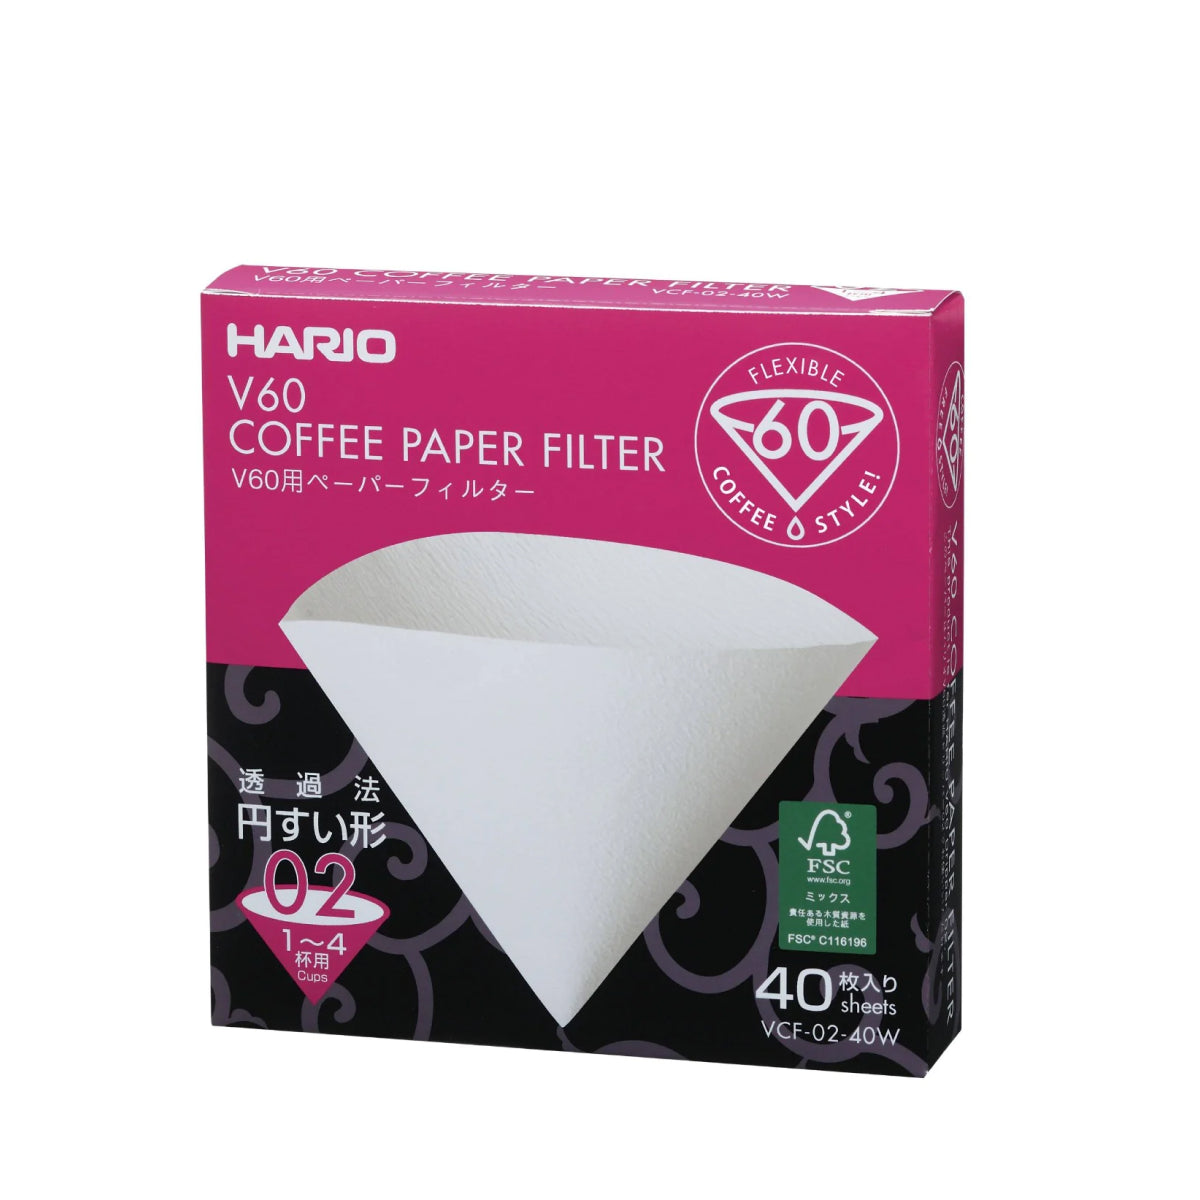 White Paper Filter for Hario Drippers - Pack of 40 - Tabbed